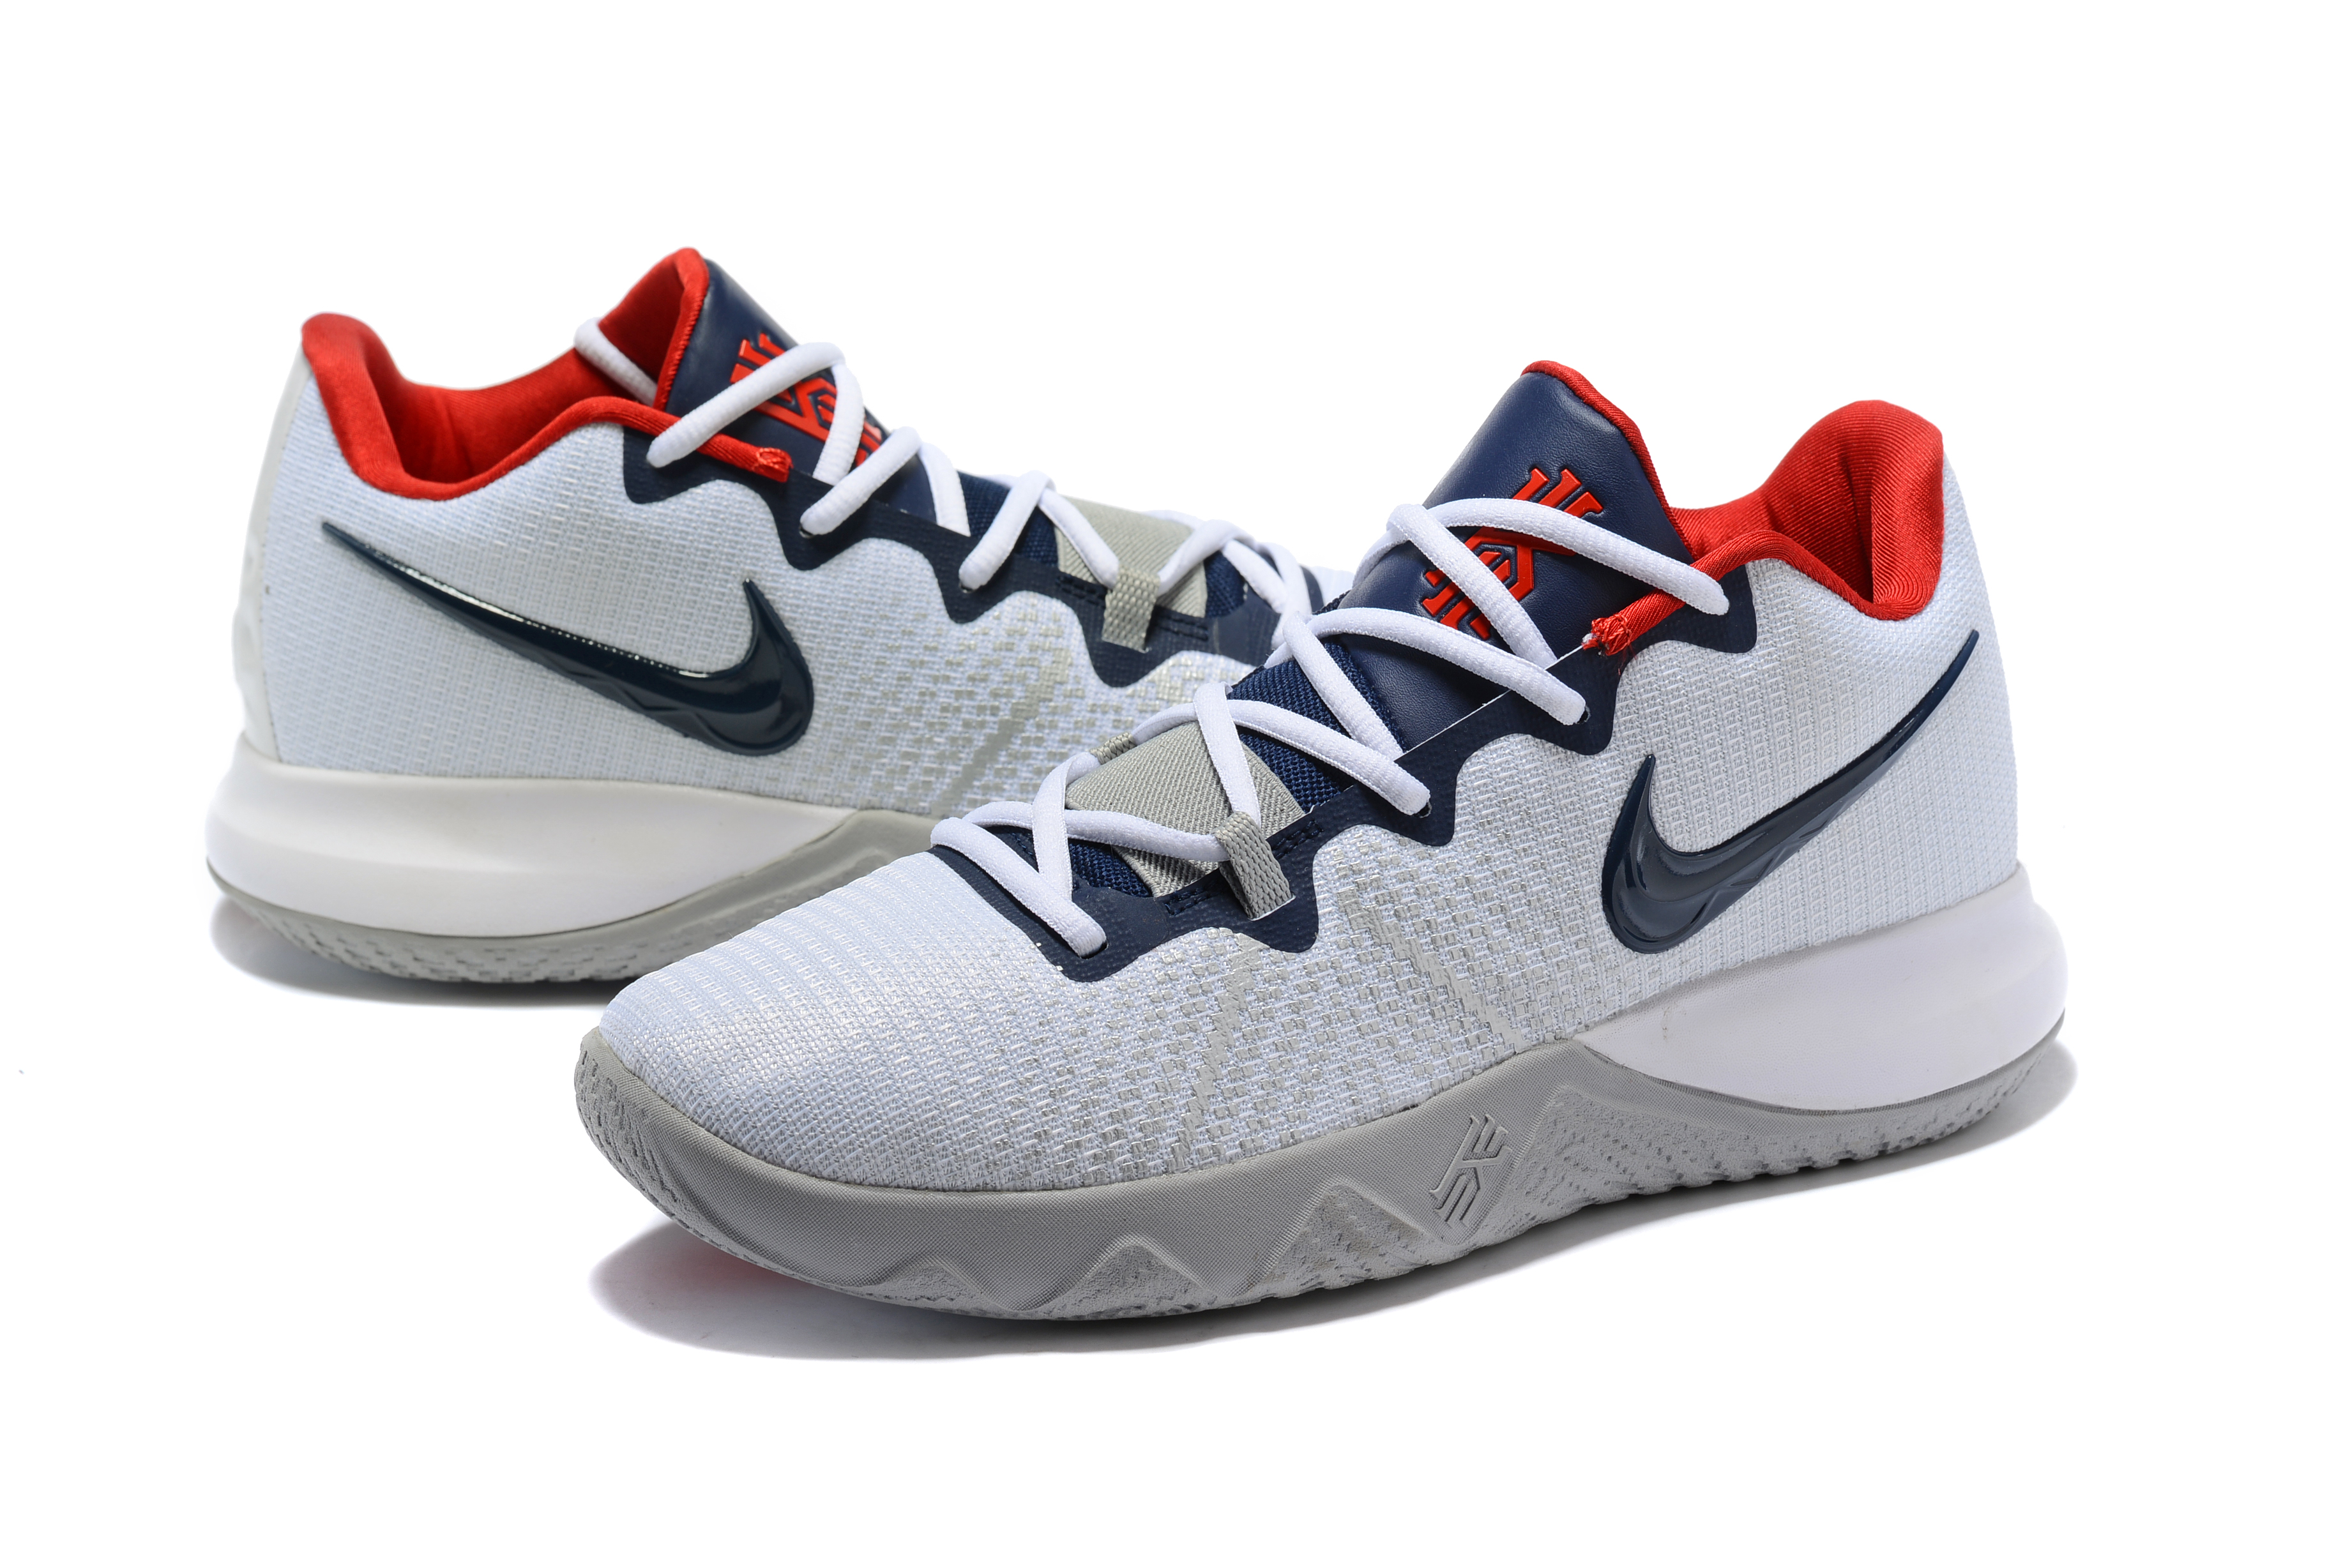 New Men Nike Kyrie Flytrap White Blue Red Grey Shoes